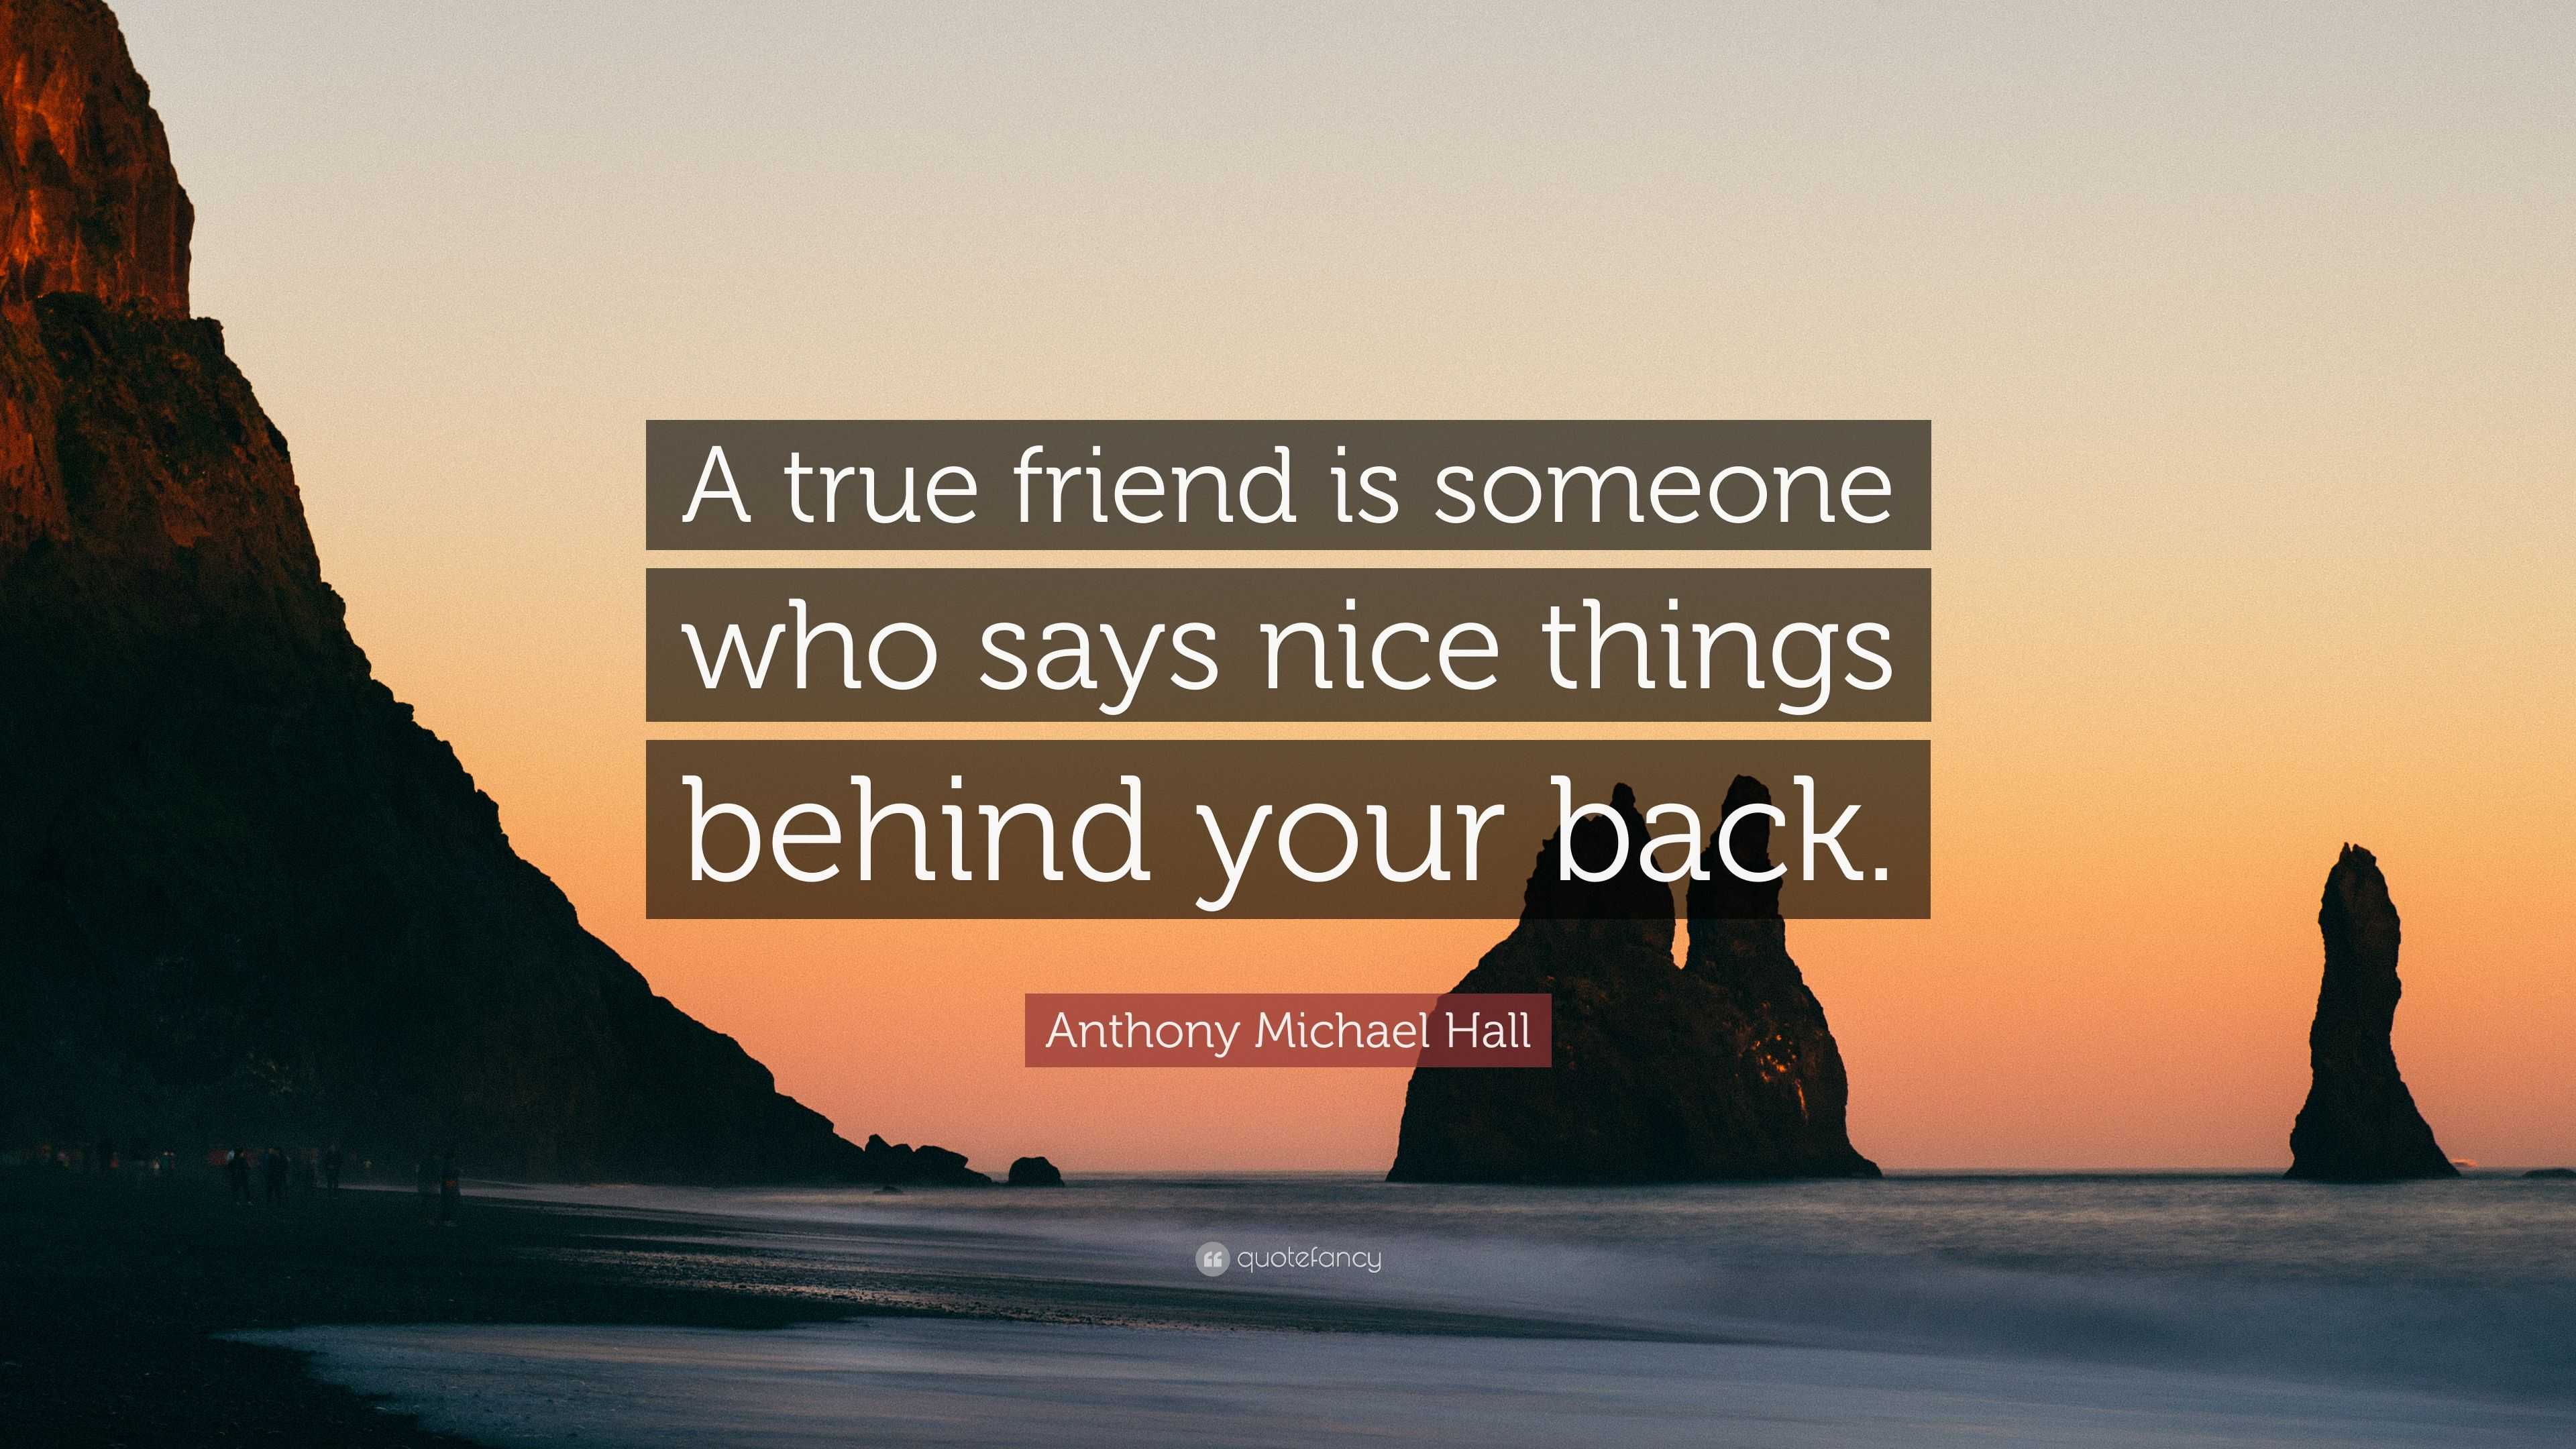 Anthony Michael Hall Quote: “A true friend is someone who says nice ...